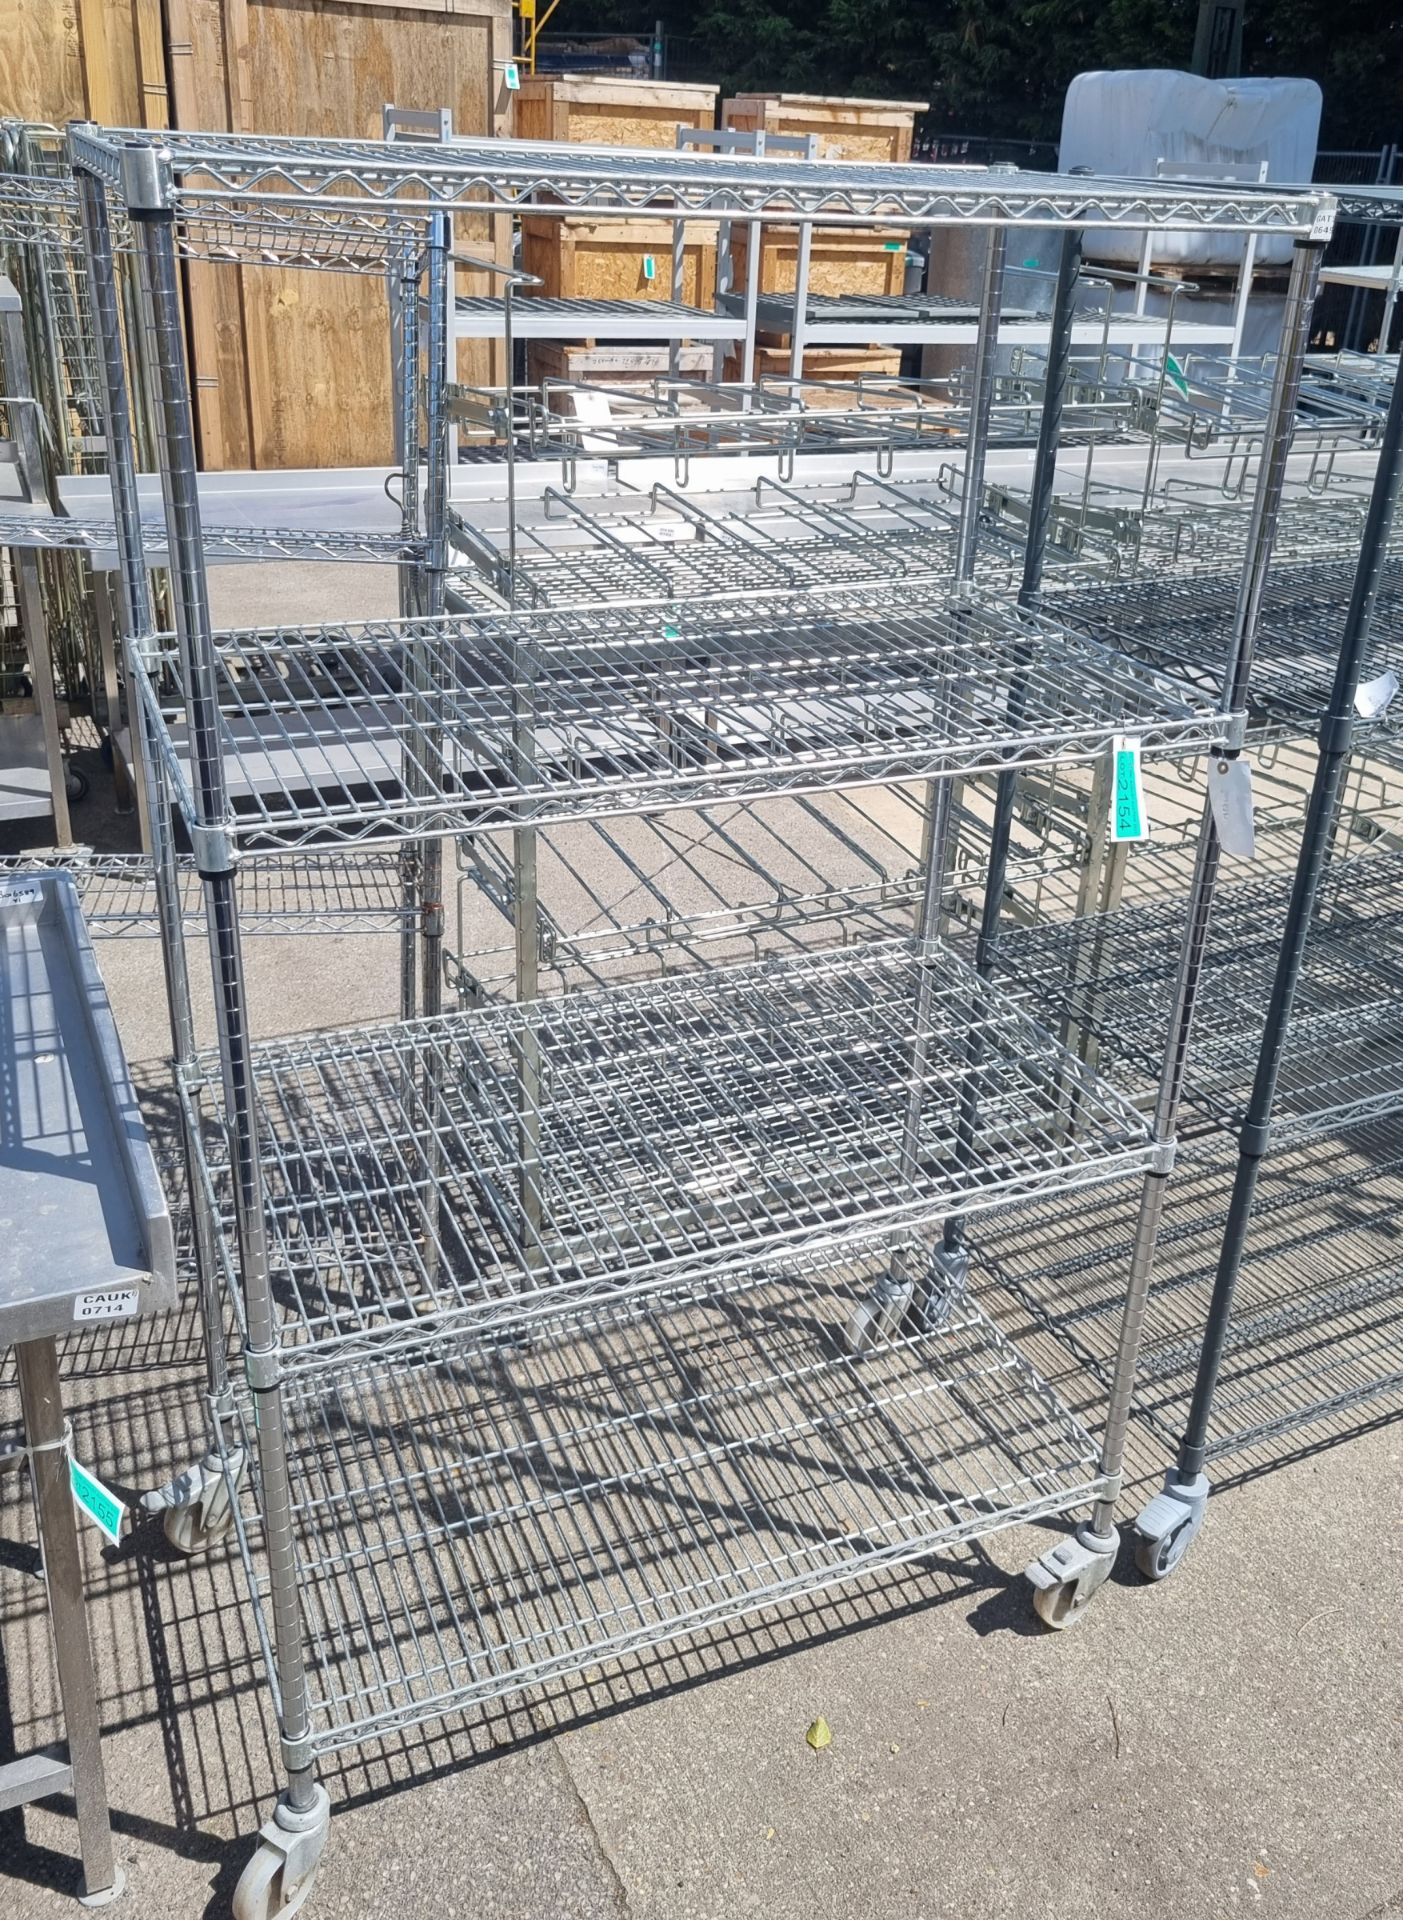 Stainless steel 4 Tier wire racking L108 x W60 x H178Cm - Image 3 of 3